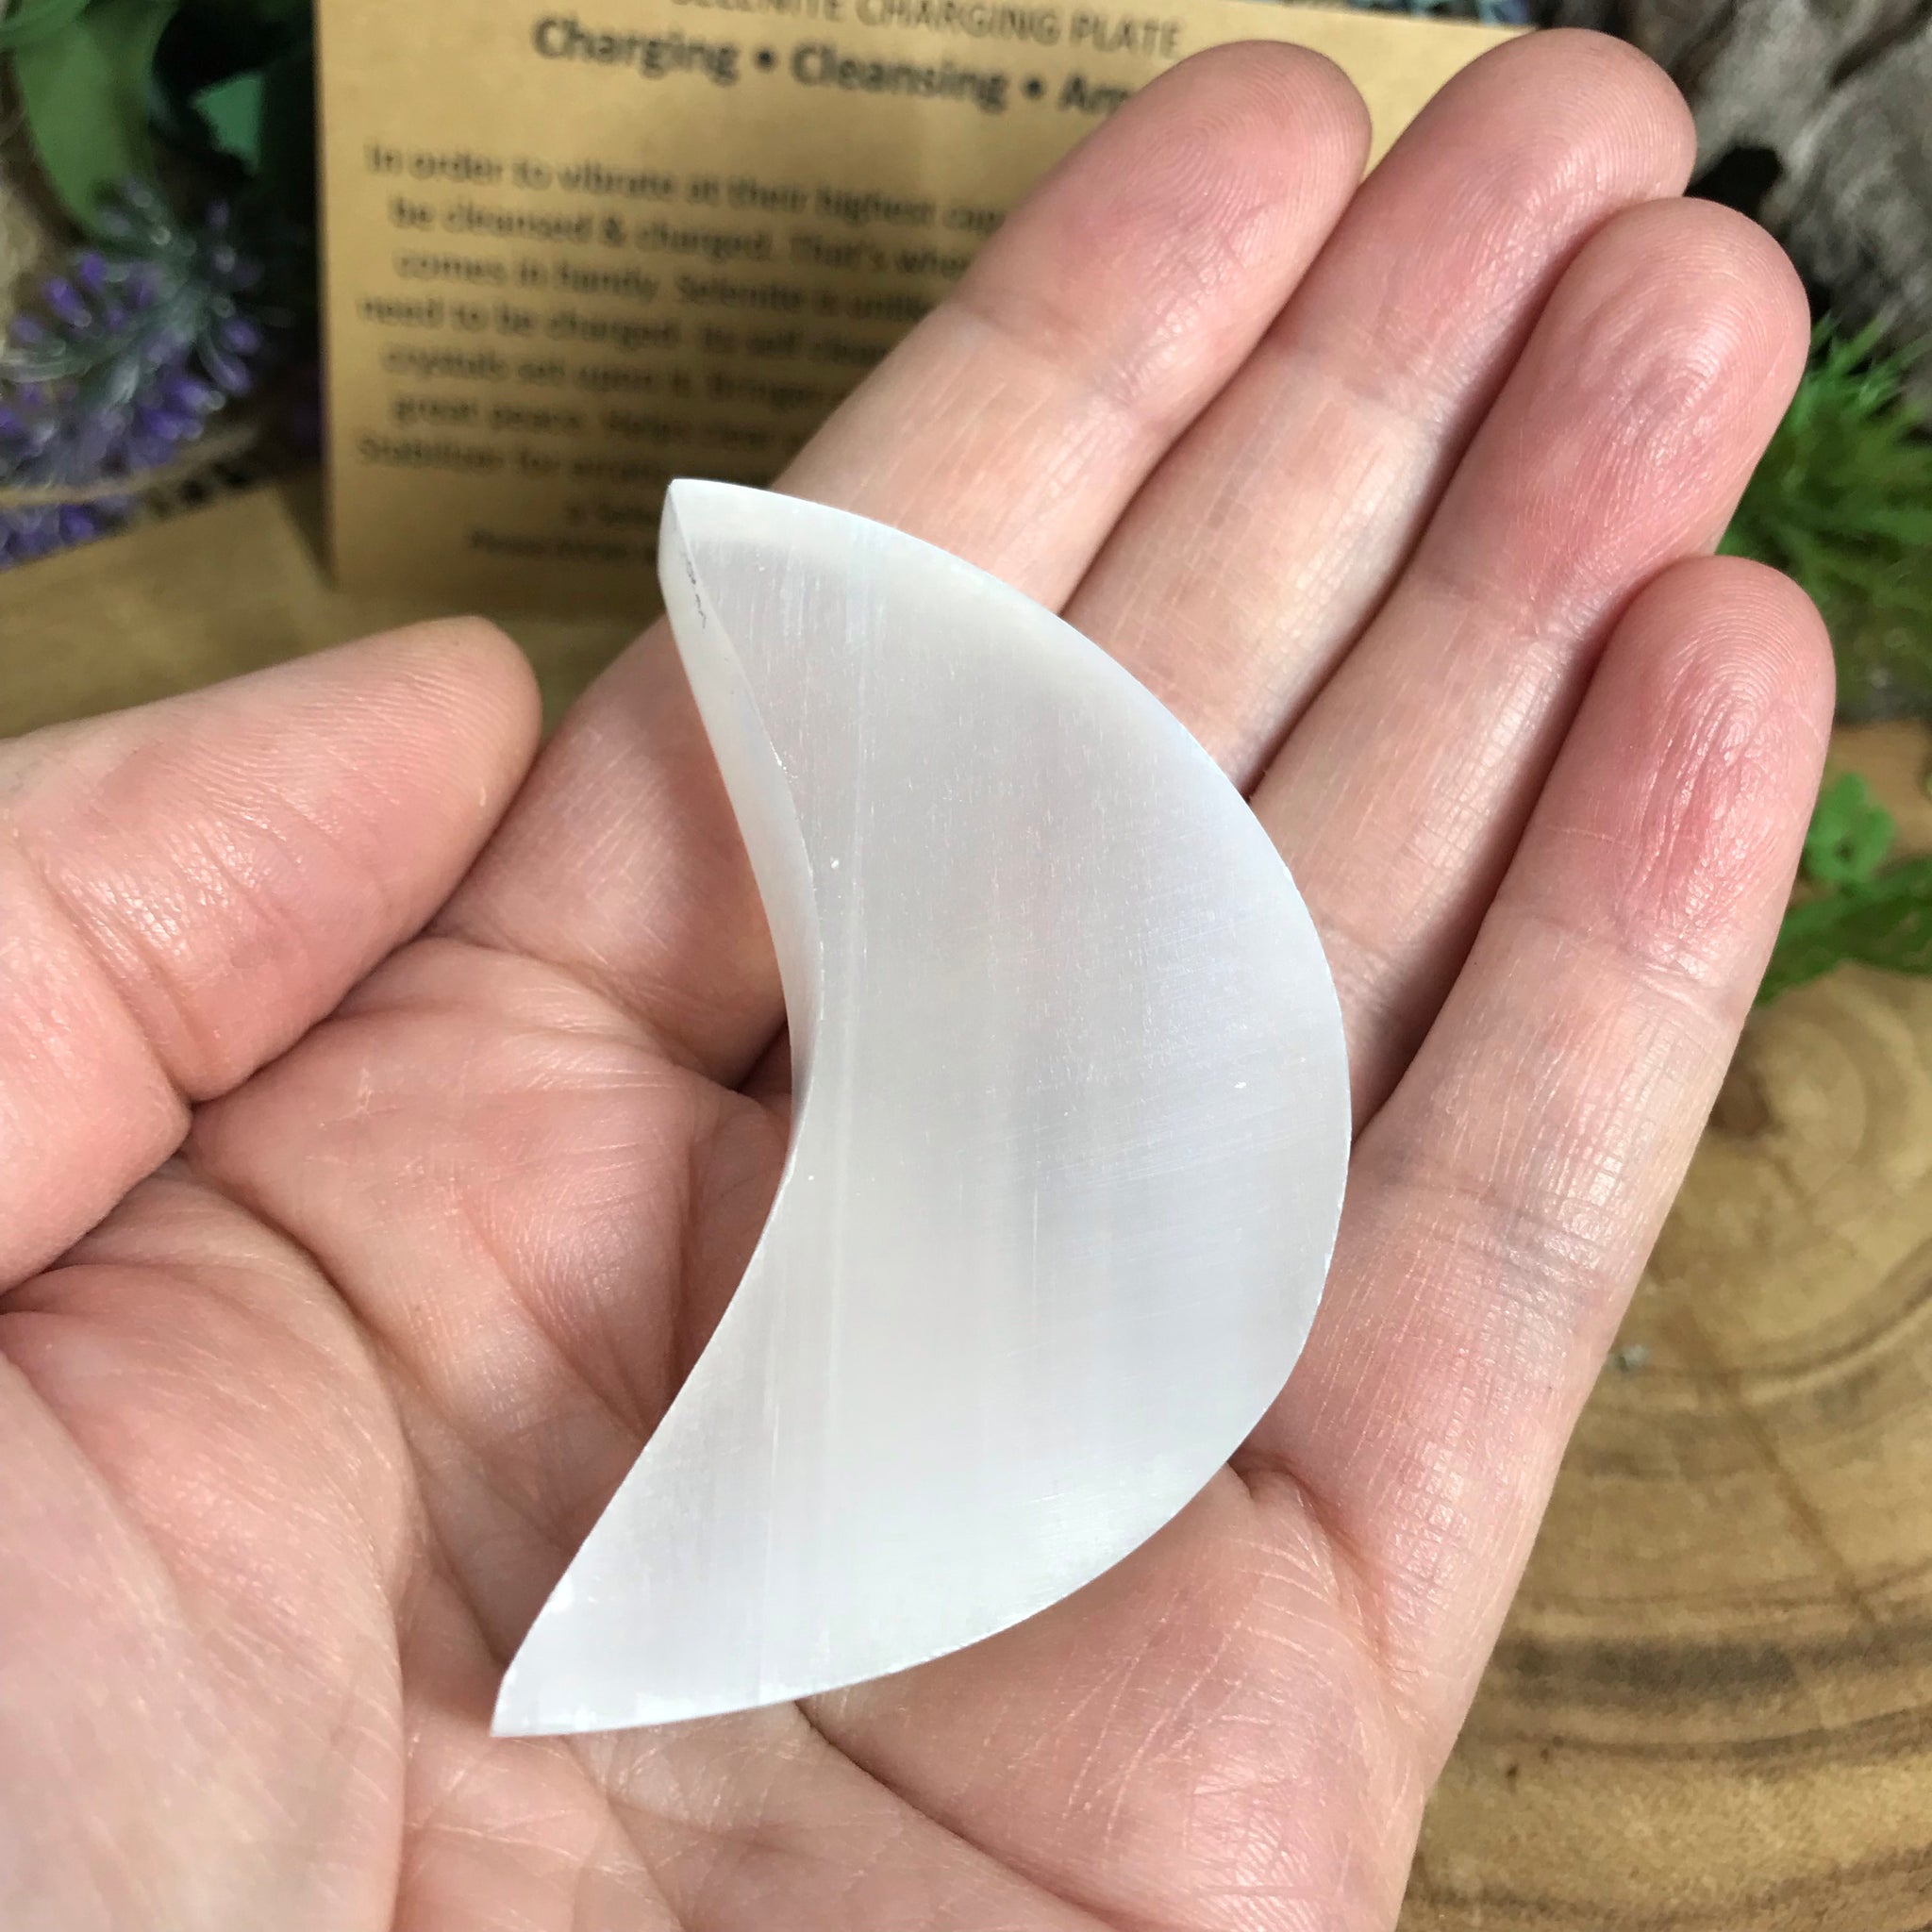 CLEANSE AND PURIFY- selenite mini moon charging plate